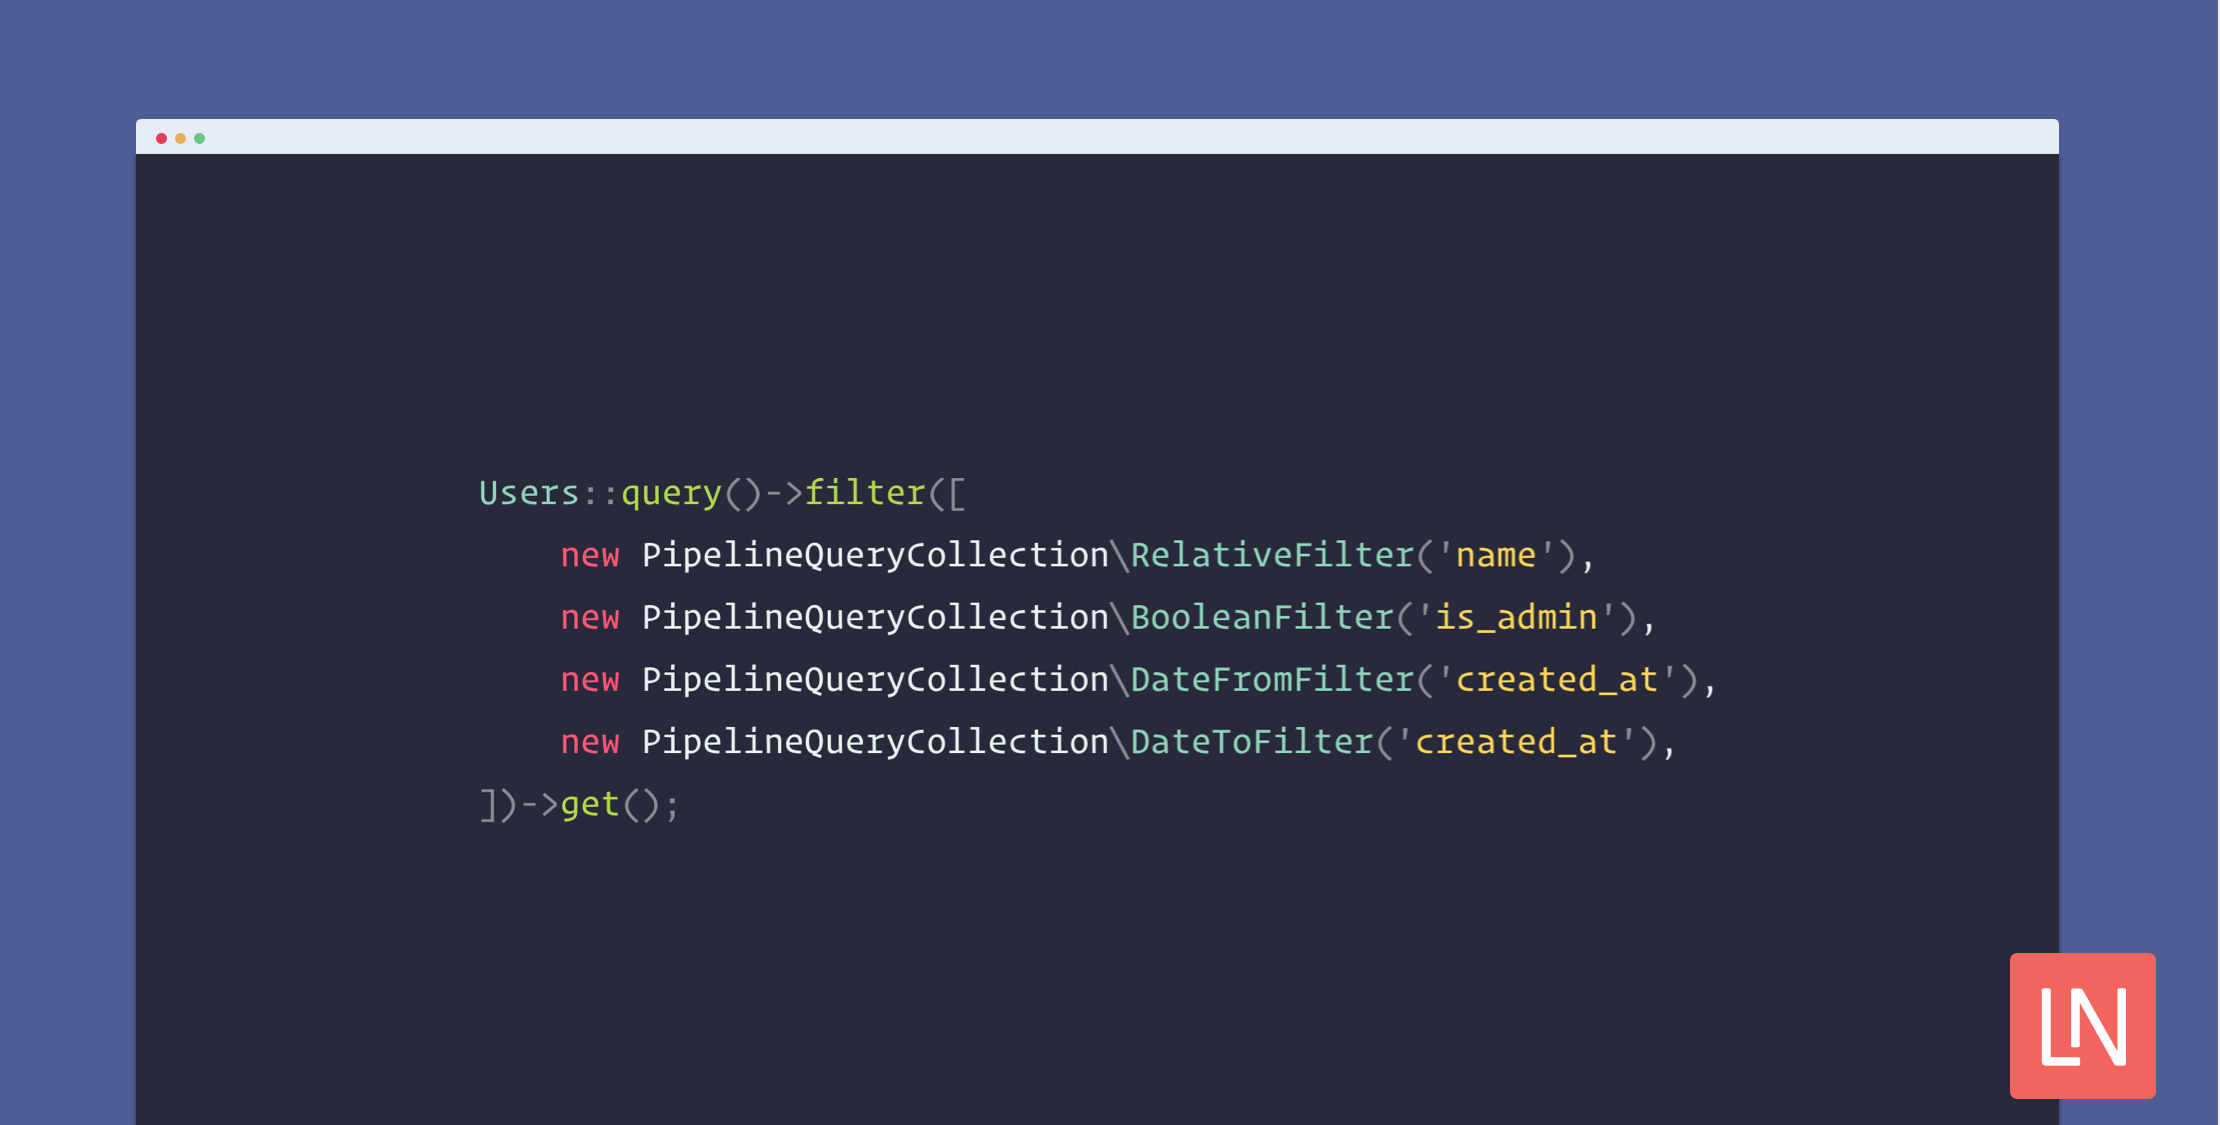 Laravel Pipeline Query Collection image